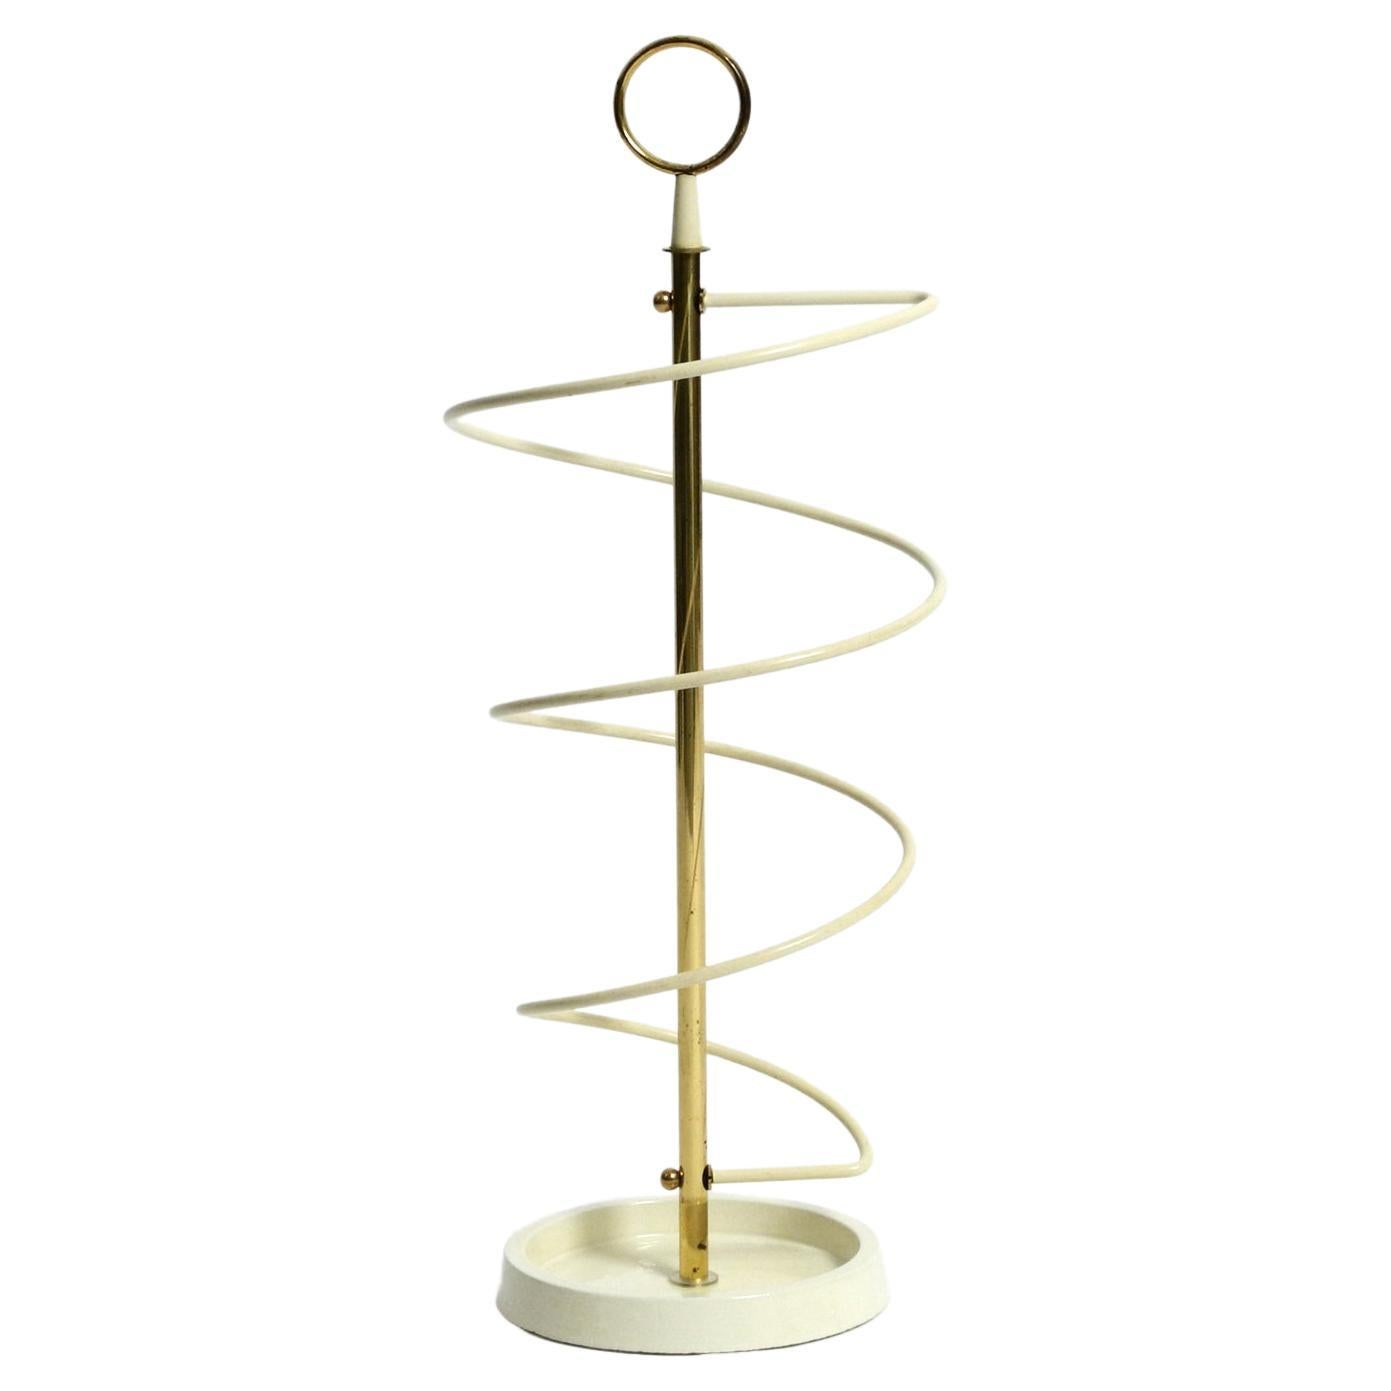 Extraordinary Rare Mid-Century Modern Umbrella Stand in String Helix Design For Sale